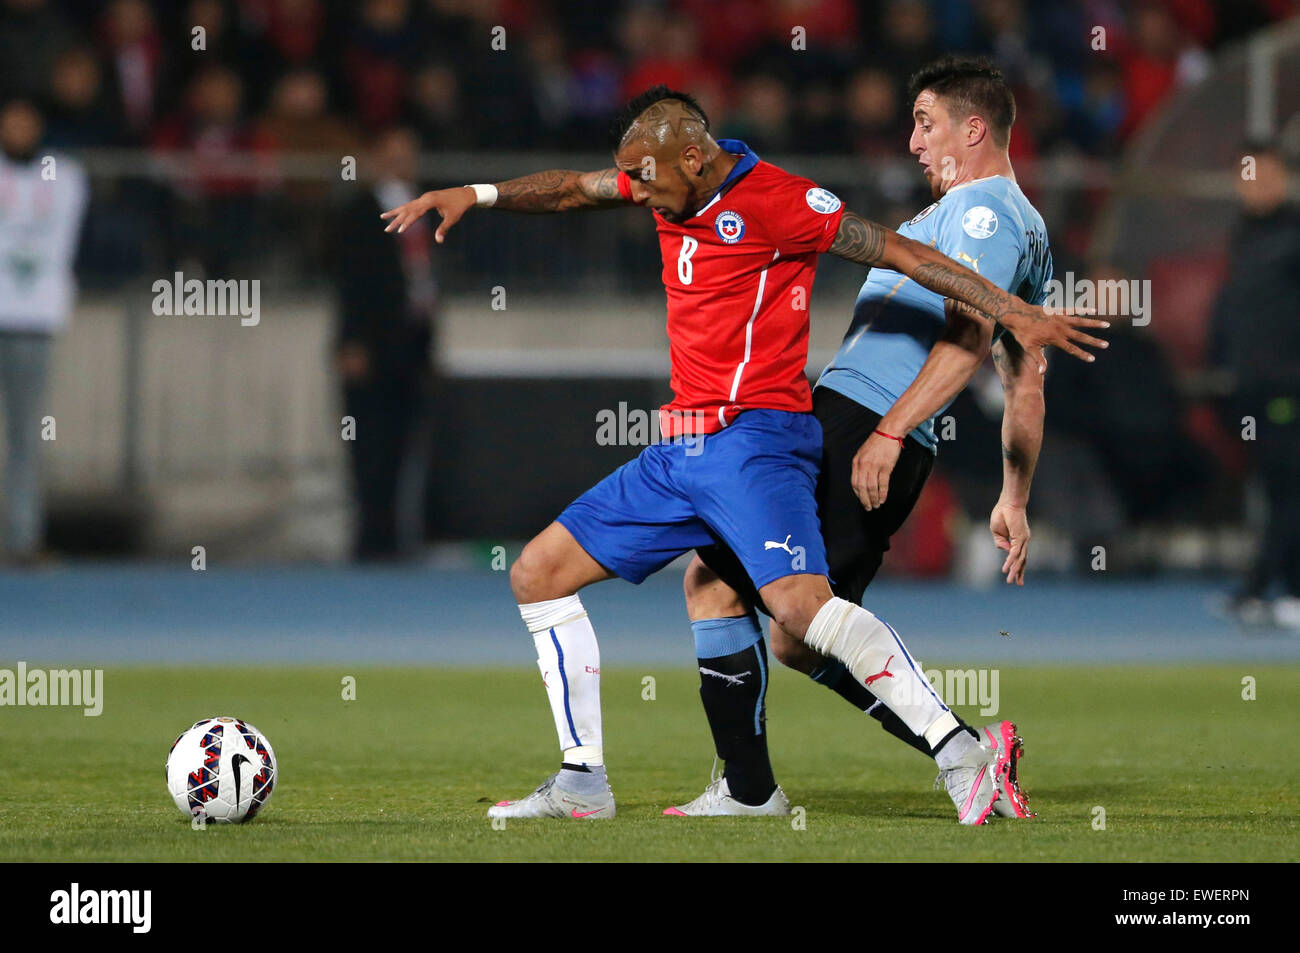 Santiago, Chile. 24th June, 2015. Arturo Vidal (L) of Chile vies with Cristian Rodriguez of Uruguay during their quarterfinal at 2015 Copa America in Santiago, Chile, on June 24, 2015. Chile won 1-0. Credit:  Jorge Villegas/Xinhua/Alamy Live News Stock Photo